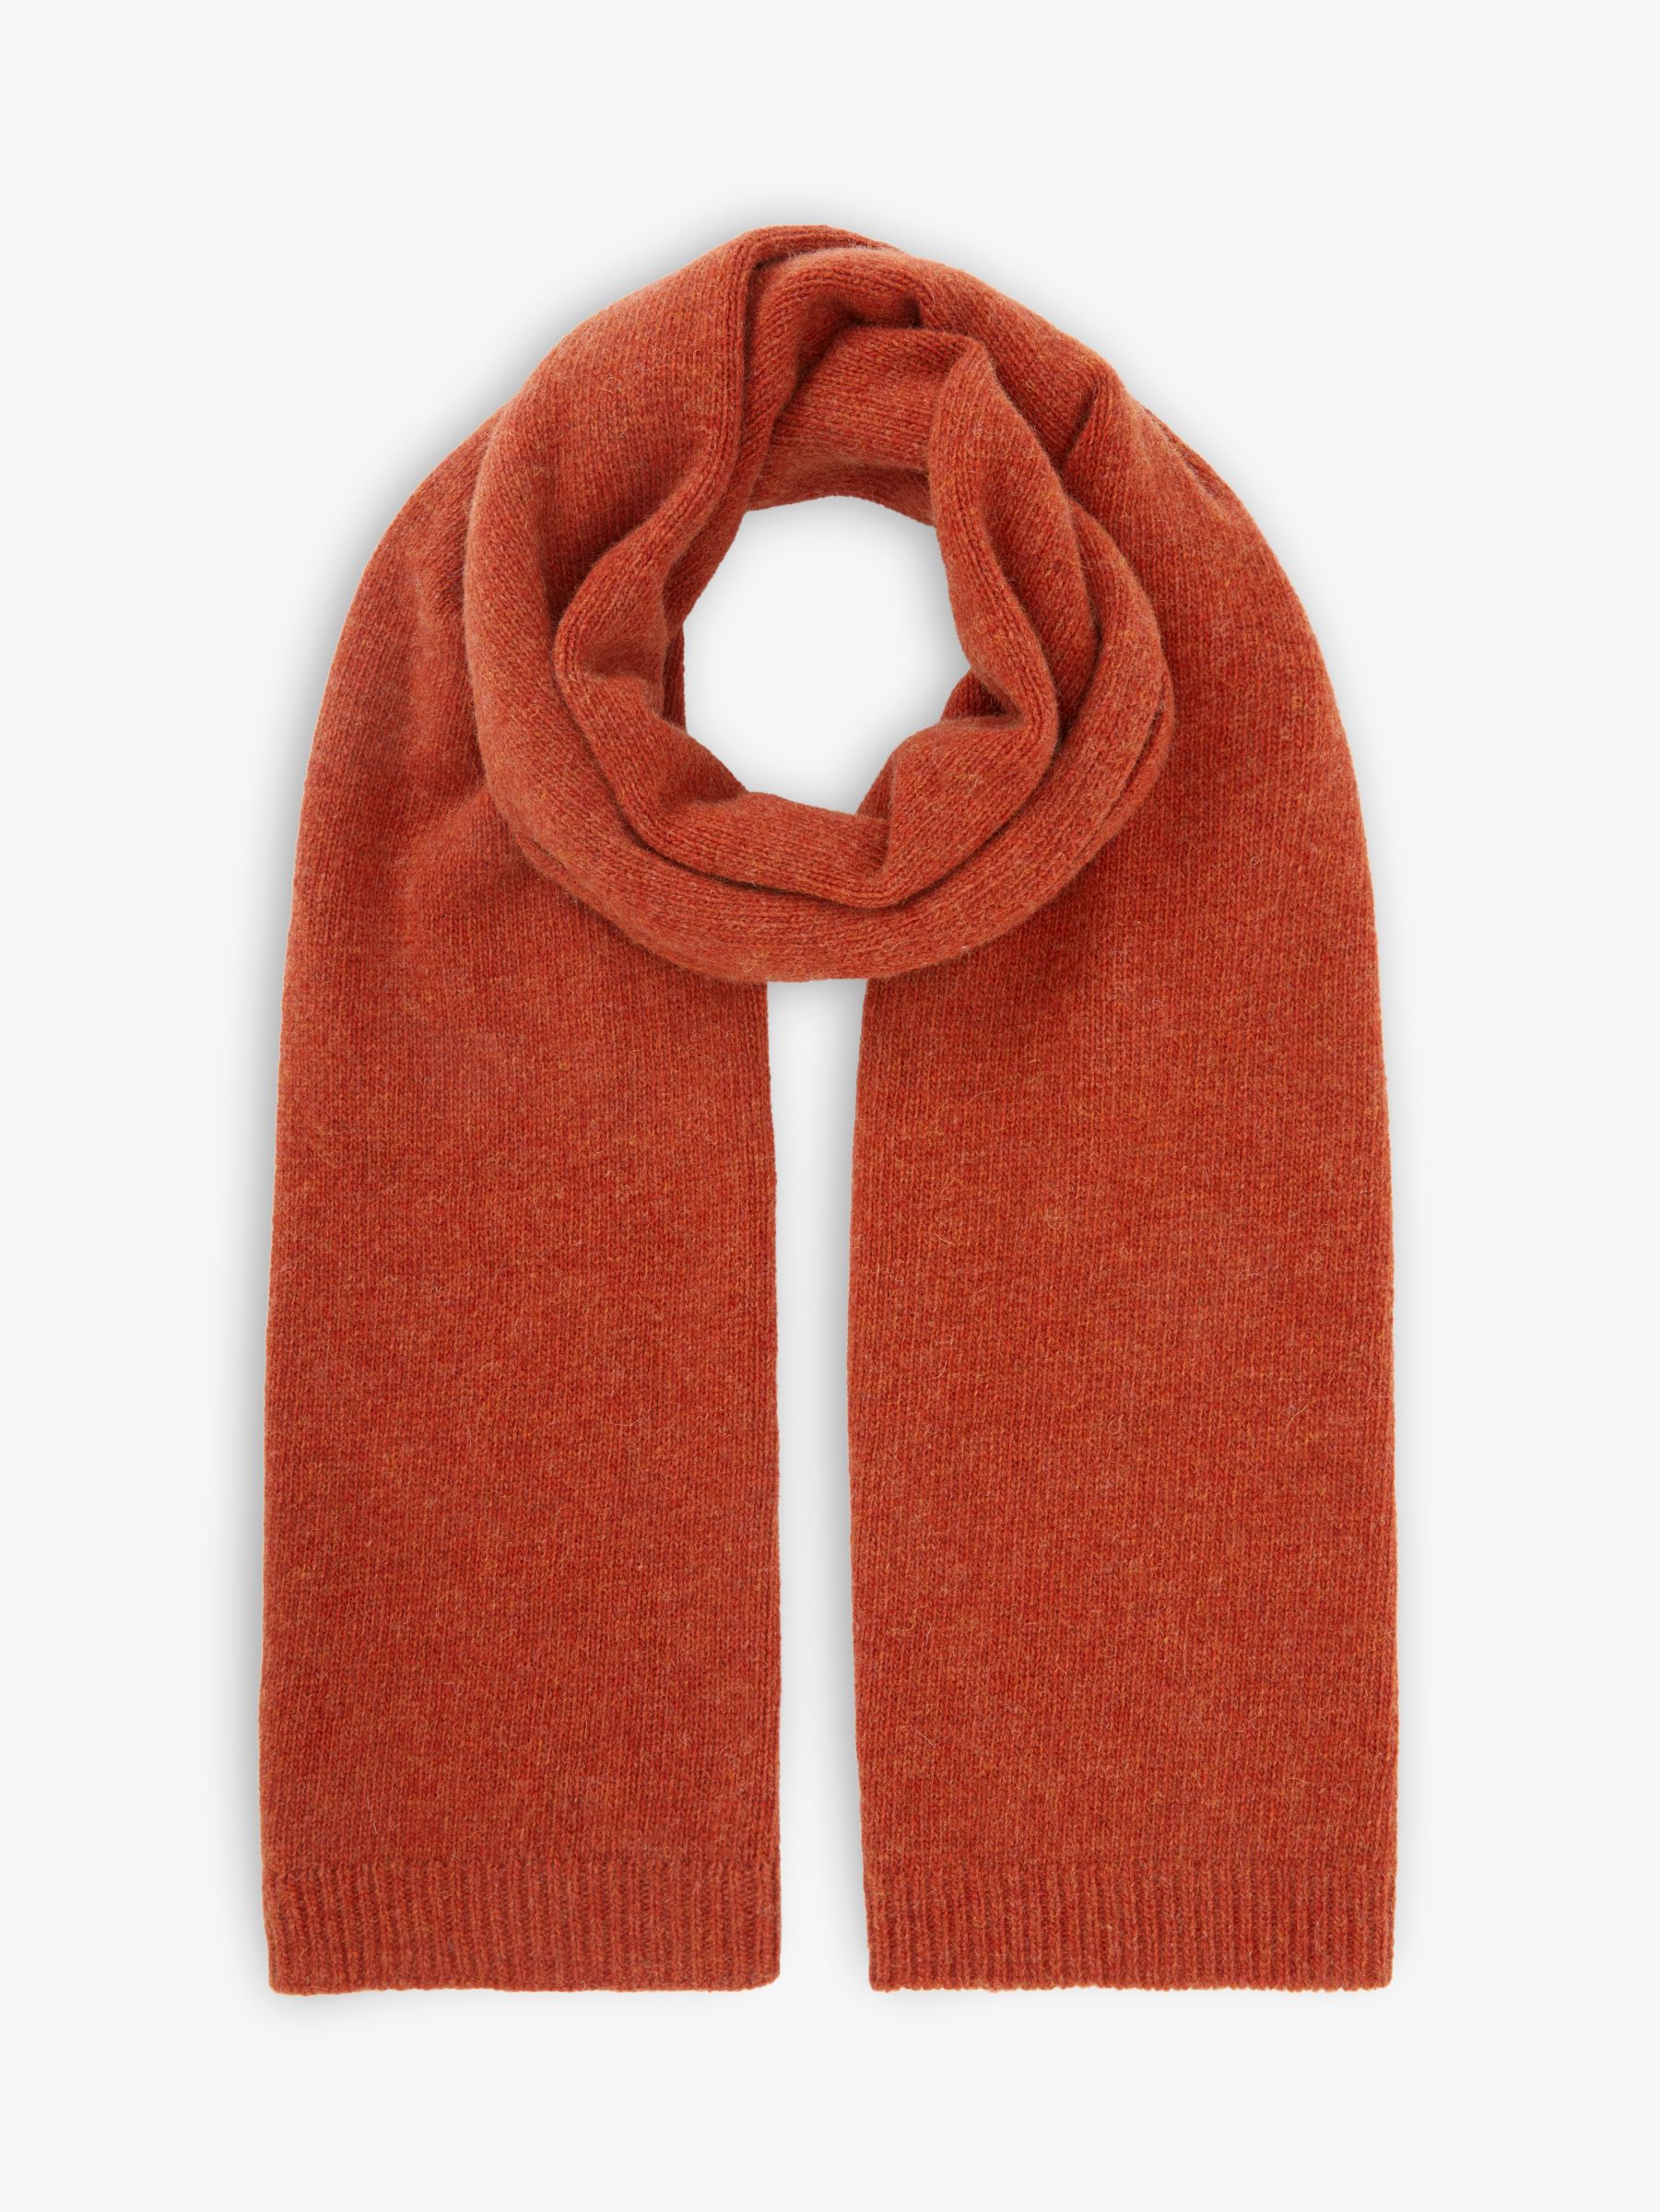 where can i buy a cashmere scarf